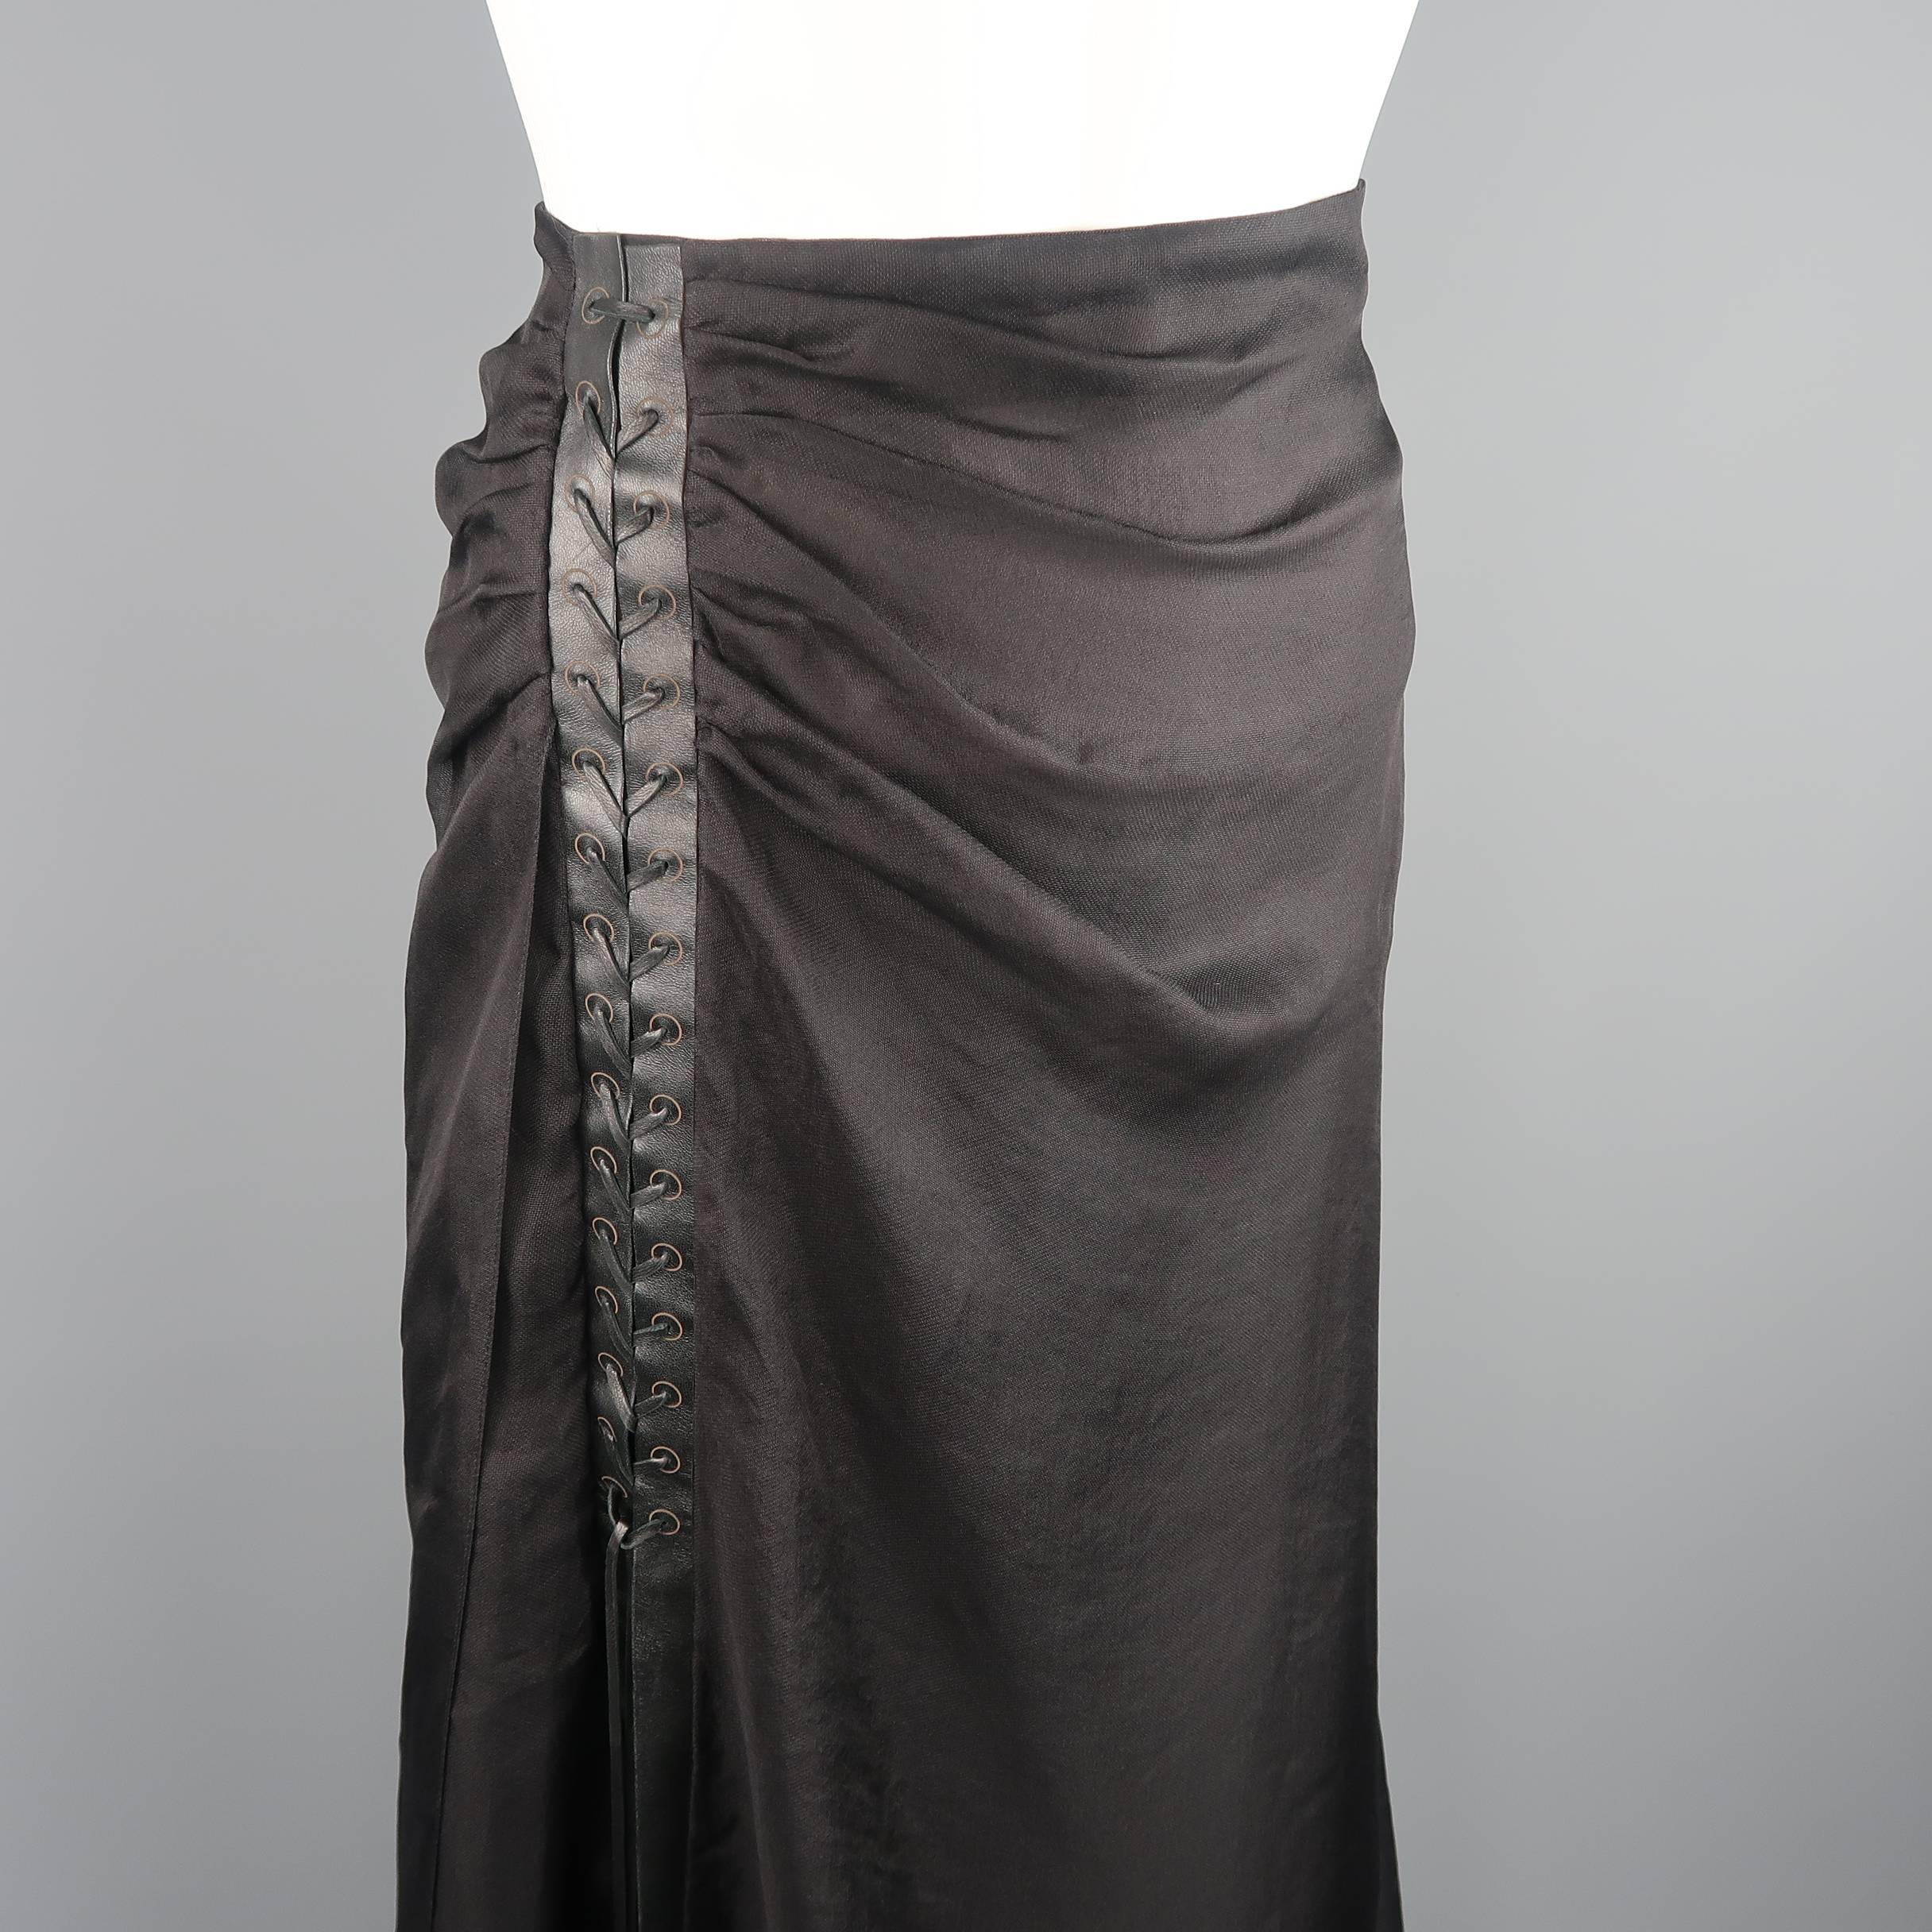 Ralph Lauren Collection maxi skirt comes in a fine black silk mesh chiffon material and features a high gathered slit with cascading layers, finished with leather lace up piping. Made in Italy.
 
Good Pre-Owned Condition.
Marked: US 8
